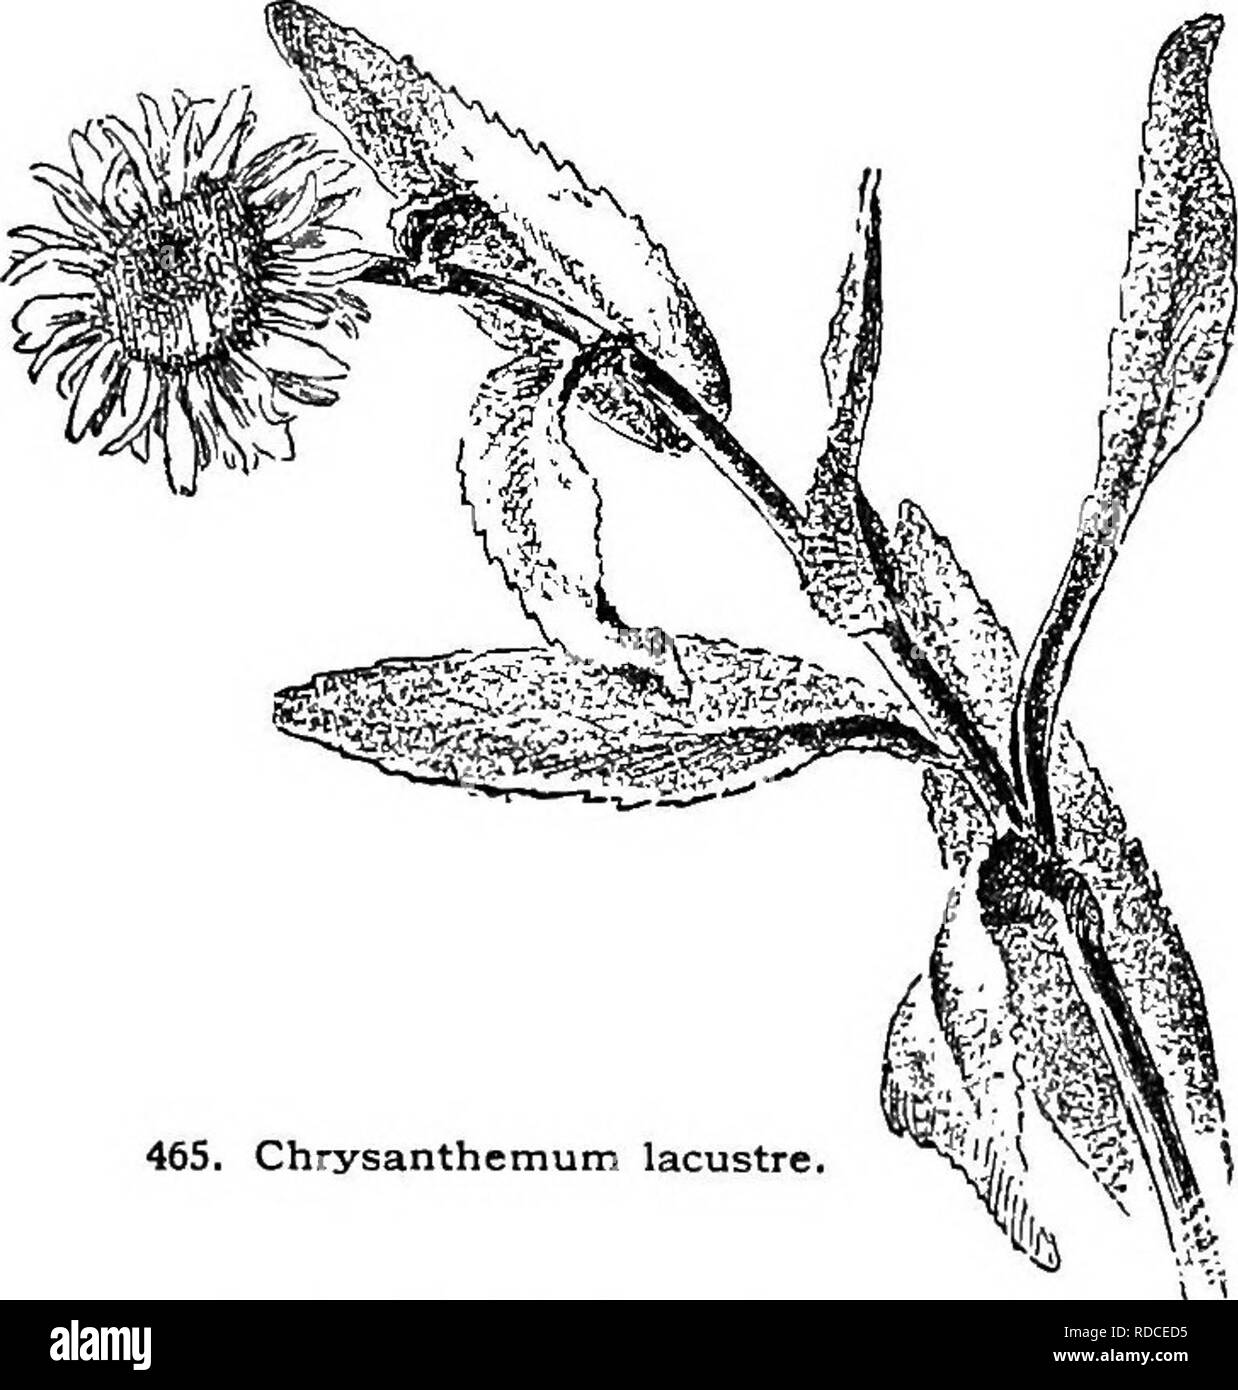 . Cyclopedia of American horticulture, comprising suggestions for cultivation of horticultural plants, descriptions of the species of fruits, vegetables, flowers, and ornamental plants sold in the United States and Canada, together with geographical and biographical sketches. Gardening. CHRYSANTHEMUM CHRYSANTHEMUM 313 AA. I/vs. not cut io the midrib: the primary incisions shallow. B. Fls. borne in flat-topped clusters. 12. Balsimita, Willd. (TanacUum Balsdmita,Awa..). Tall and stout: Ivs. sweet-scented, oval or olilong, ob-. 465. Chrysanthemum lacustre tuse, margined with blunt or sharp teeth Stock Photo